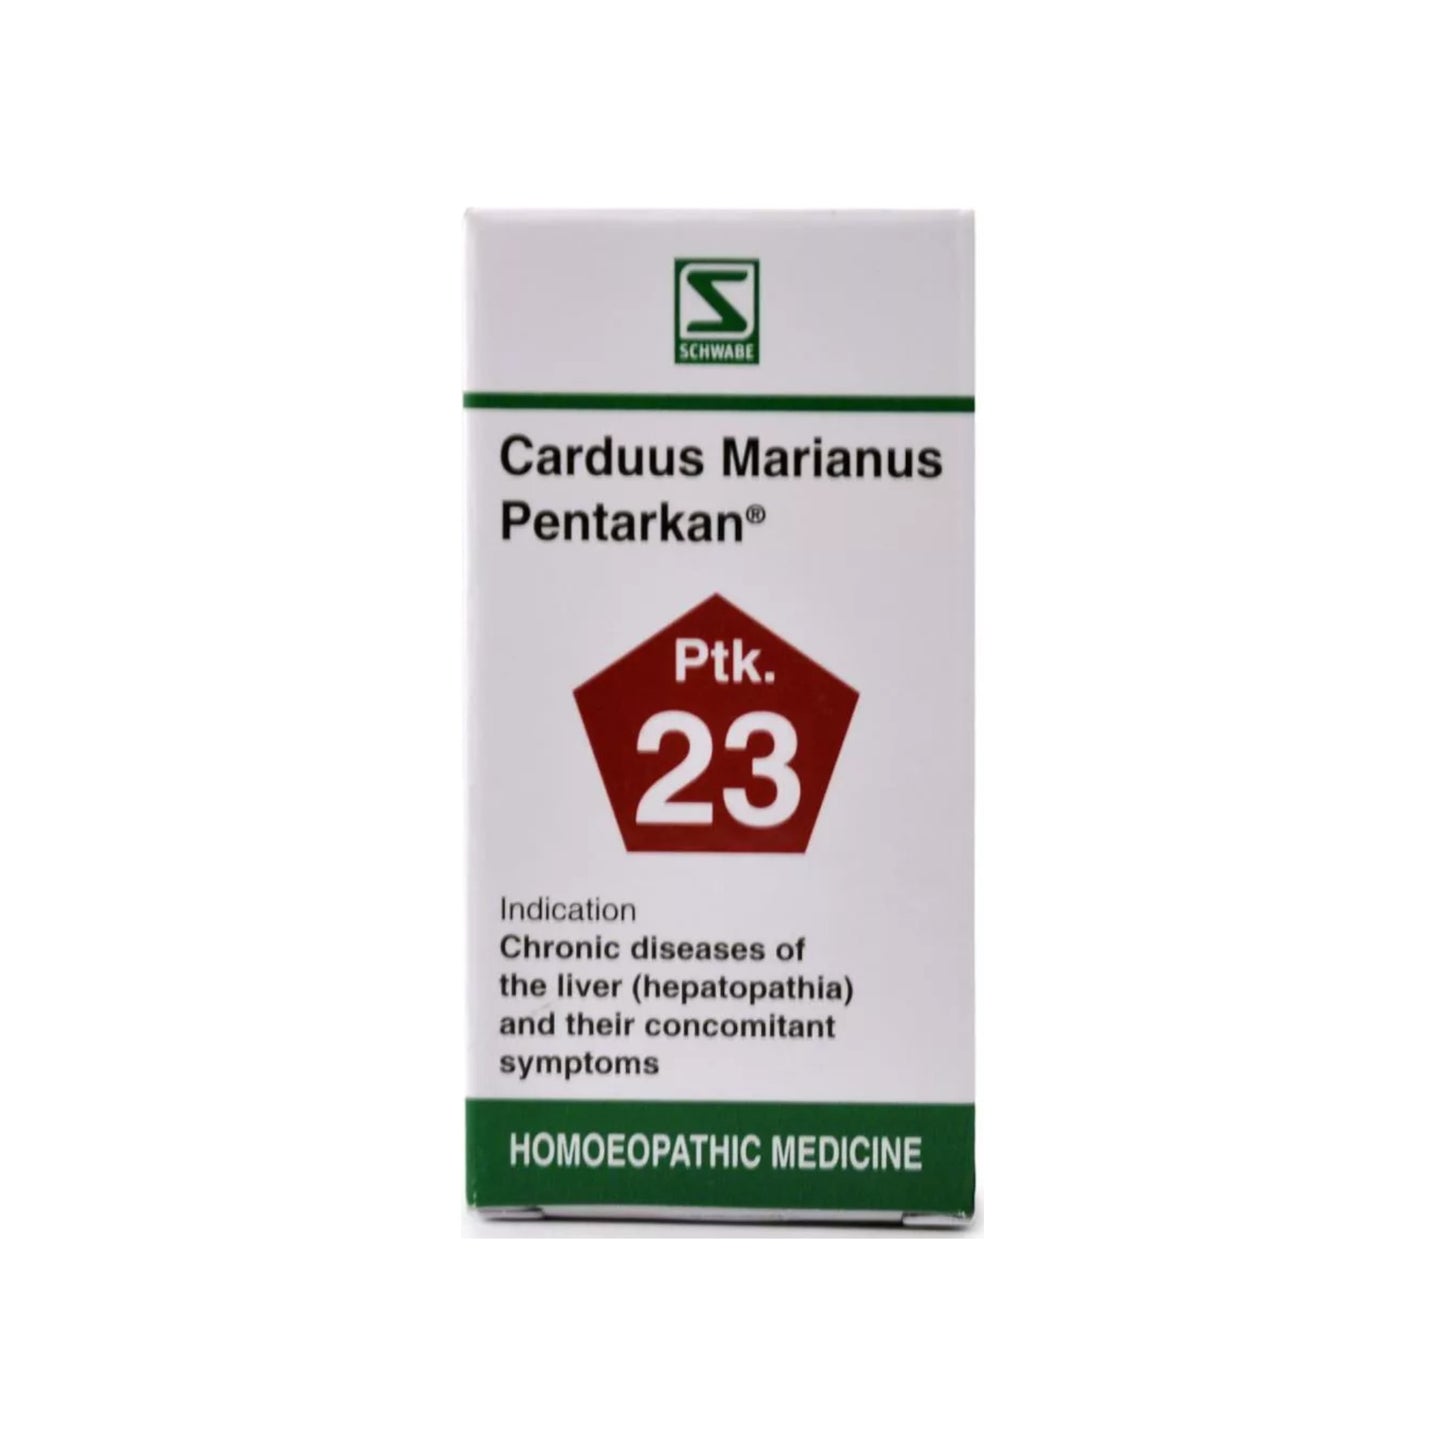 Image: Dr. Schwabe Carduus Marianus Pentarkan Tablets 20 g: Homeopathic liver support for jaundice, cirrhosis, and fatty liver.